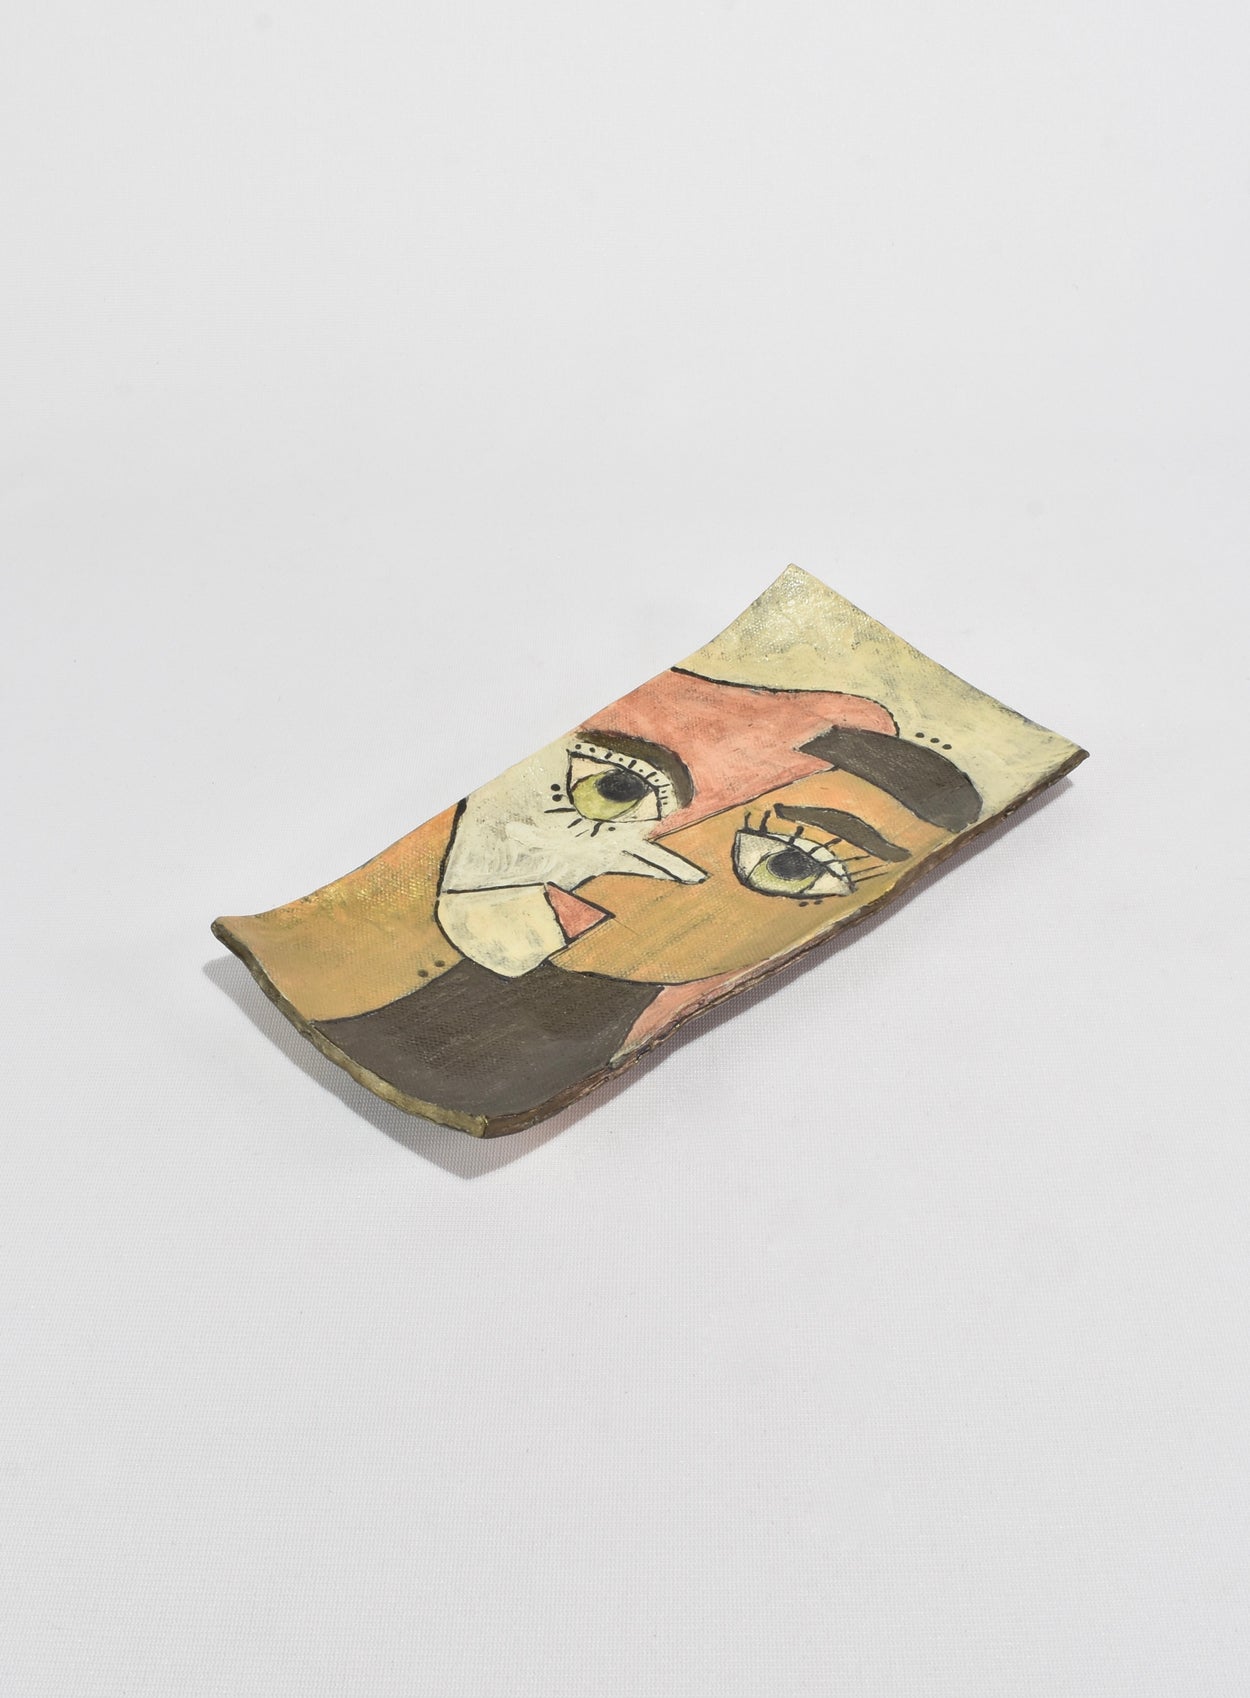 Cubist Face Tray